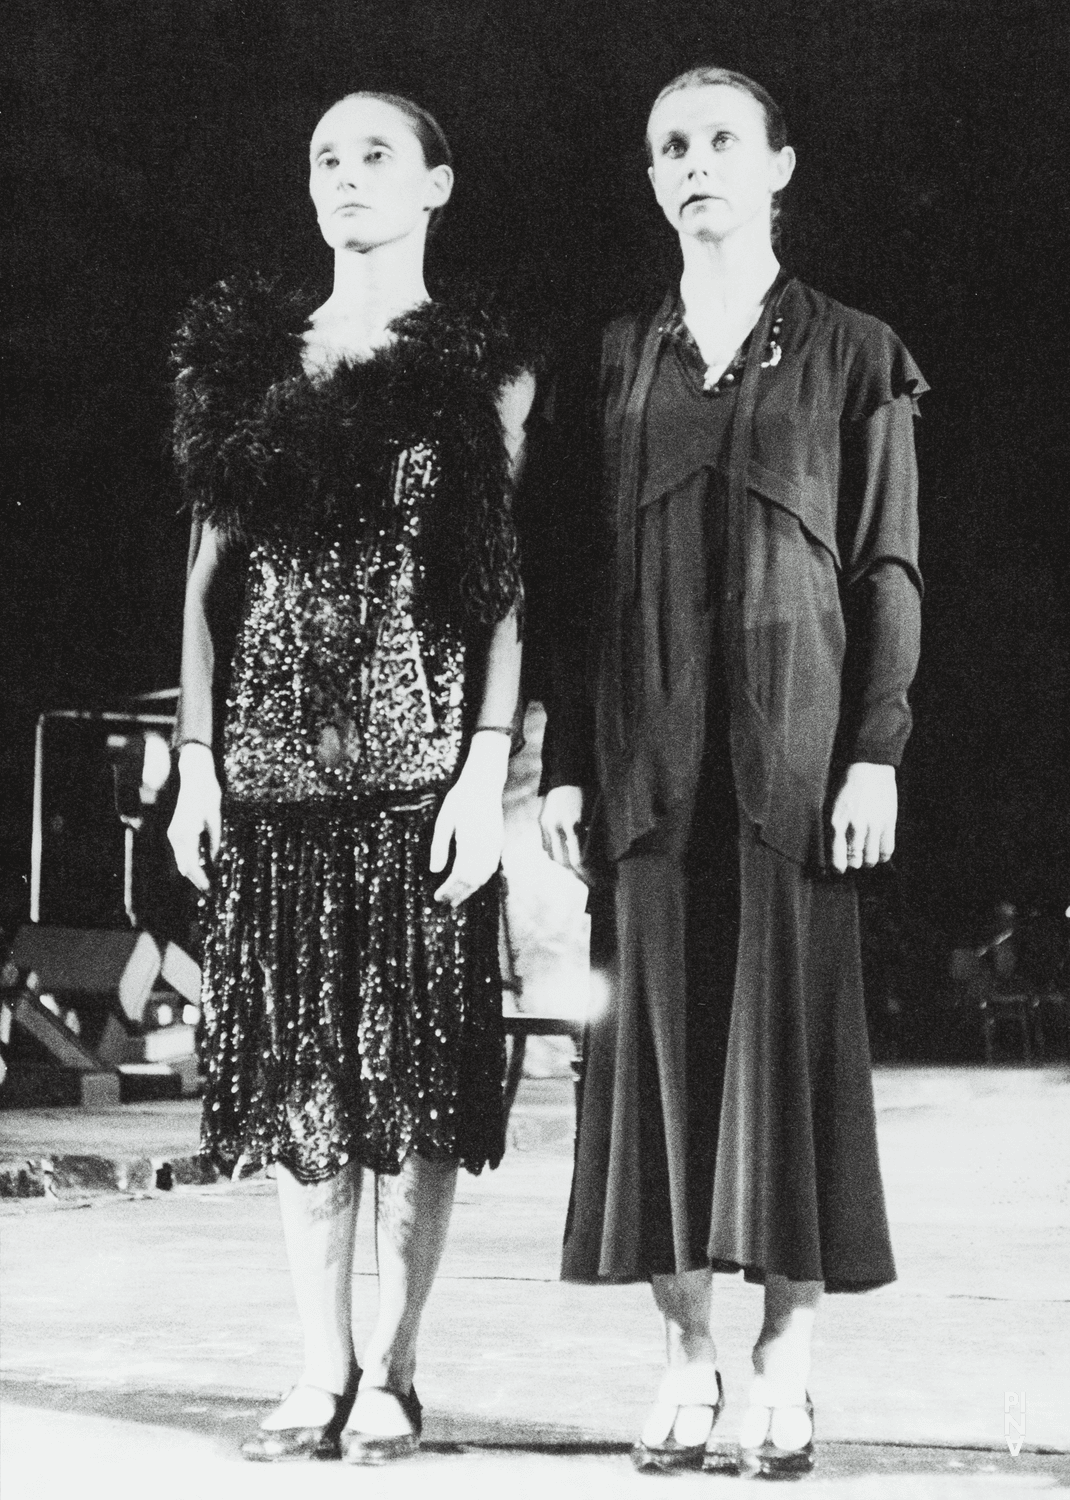 Josephine Ann Endicott and Nazareth Panadero in “The Seven Deadly Sins” by Pina Bausch